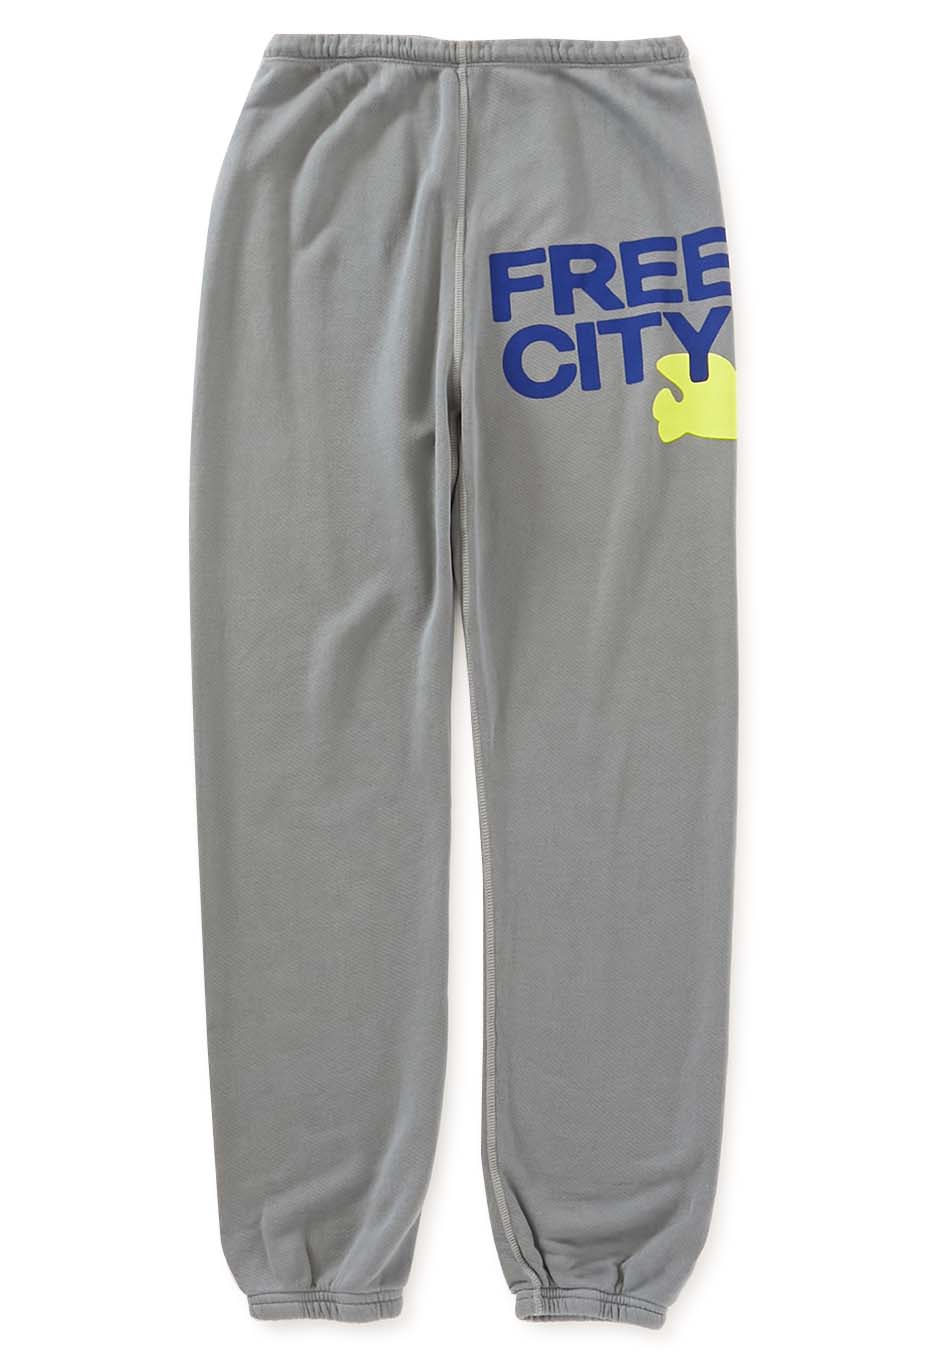 FREECITY FCBSW047 SUPERFLUFF LUX OGSWEAT PANT